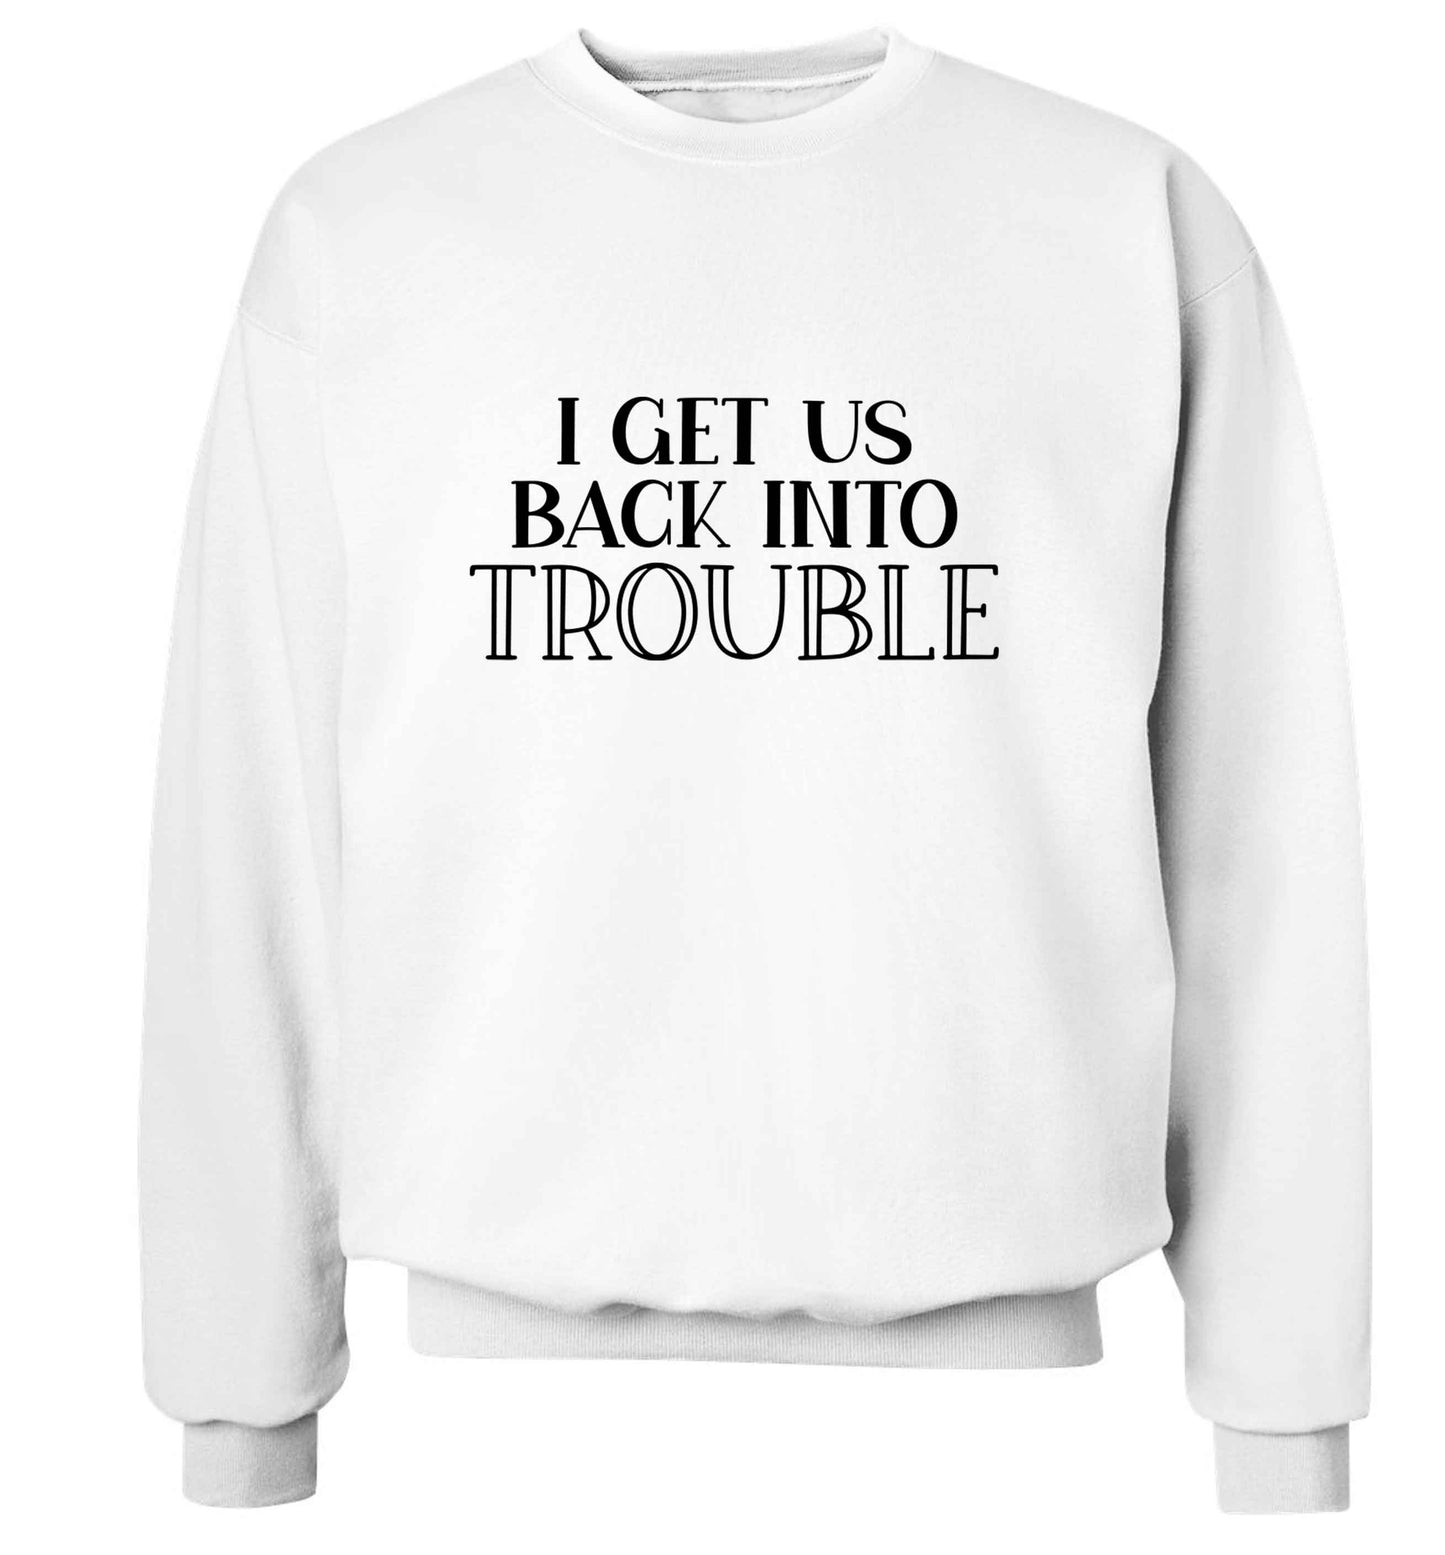 I get us back into trouble adult's unisex white sweater 2XL